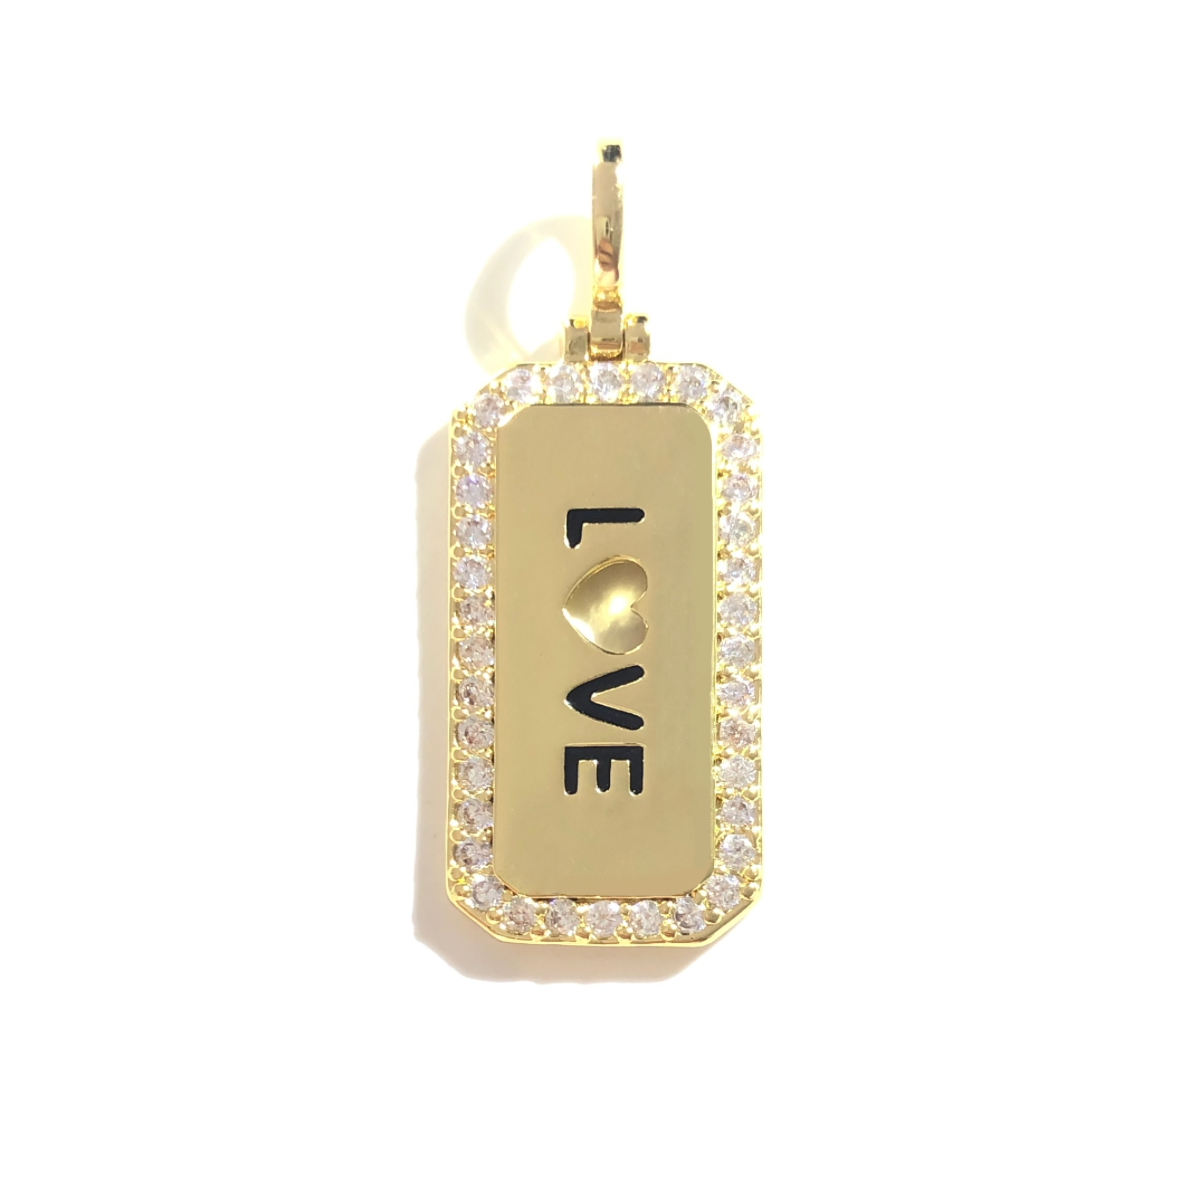 10pcs/lot 38*15mm CZ Paved Love Word Tags Charms Pendants Gold CZ Paved Charms Christian Quotes New Charms Arrivals Word Tags Charms Beads Beyond